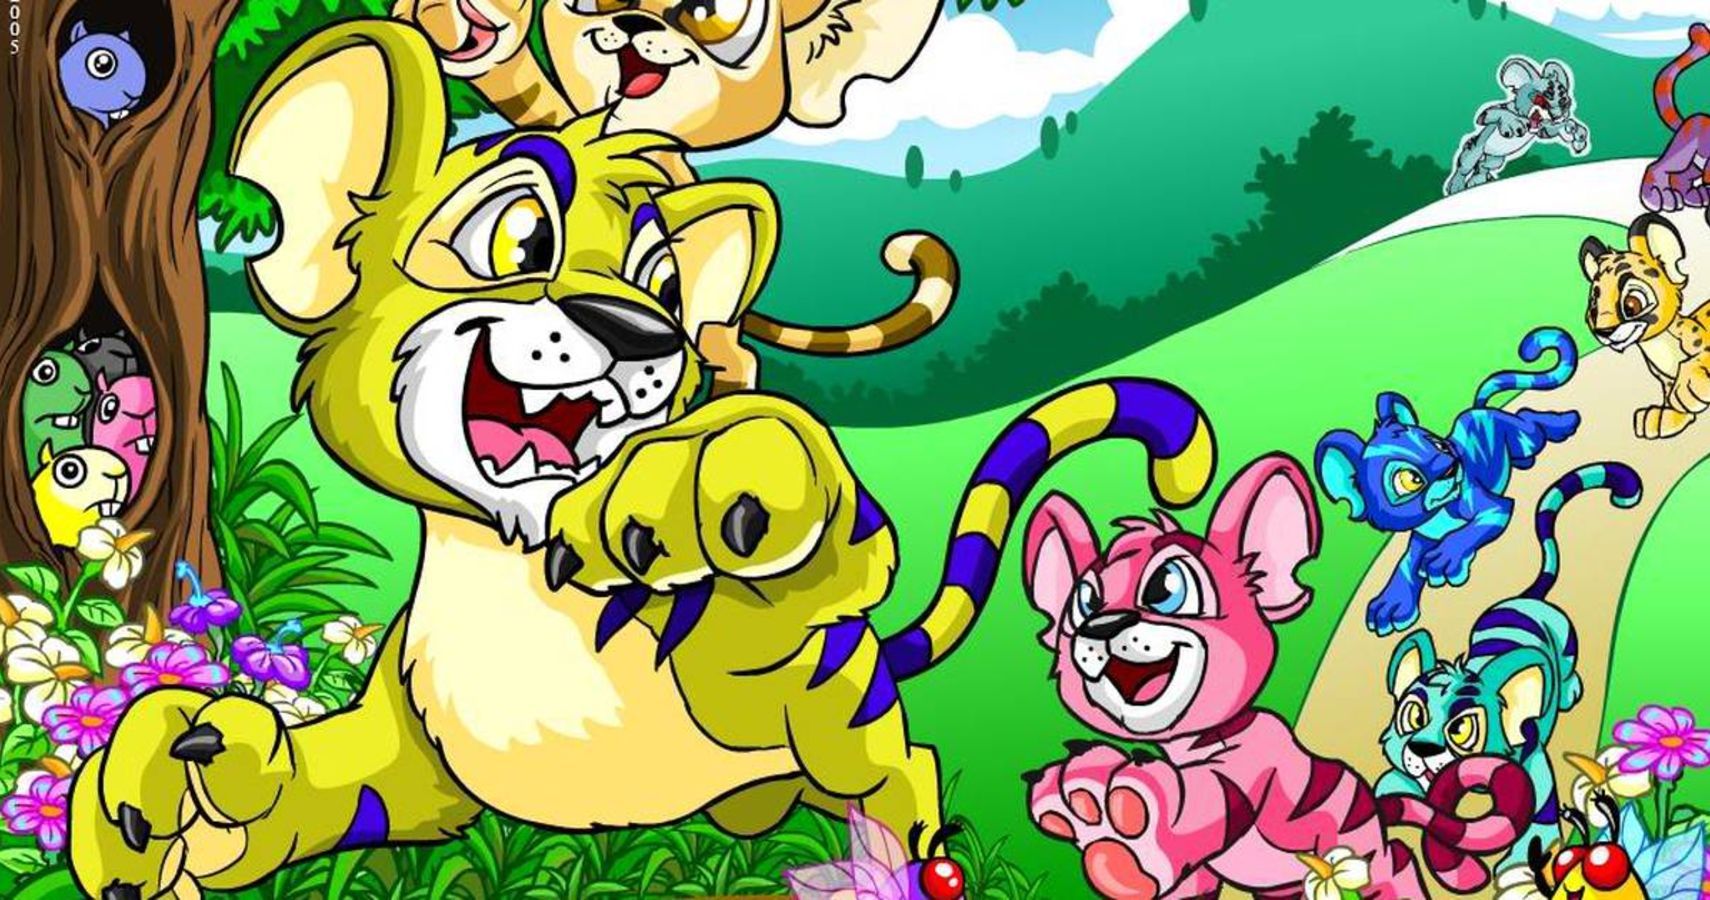 Neopets Is Getting A Mobile Game (But We’re Not Sure When)